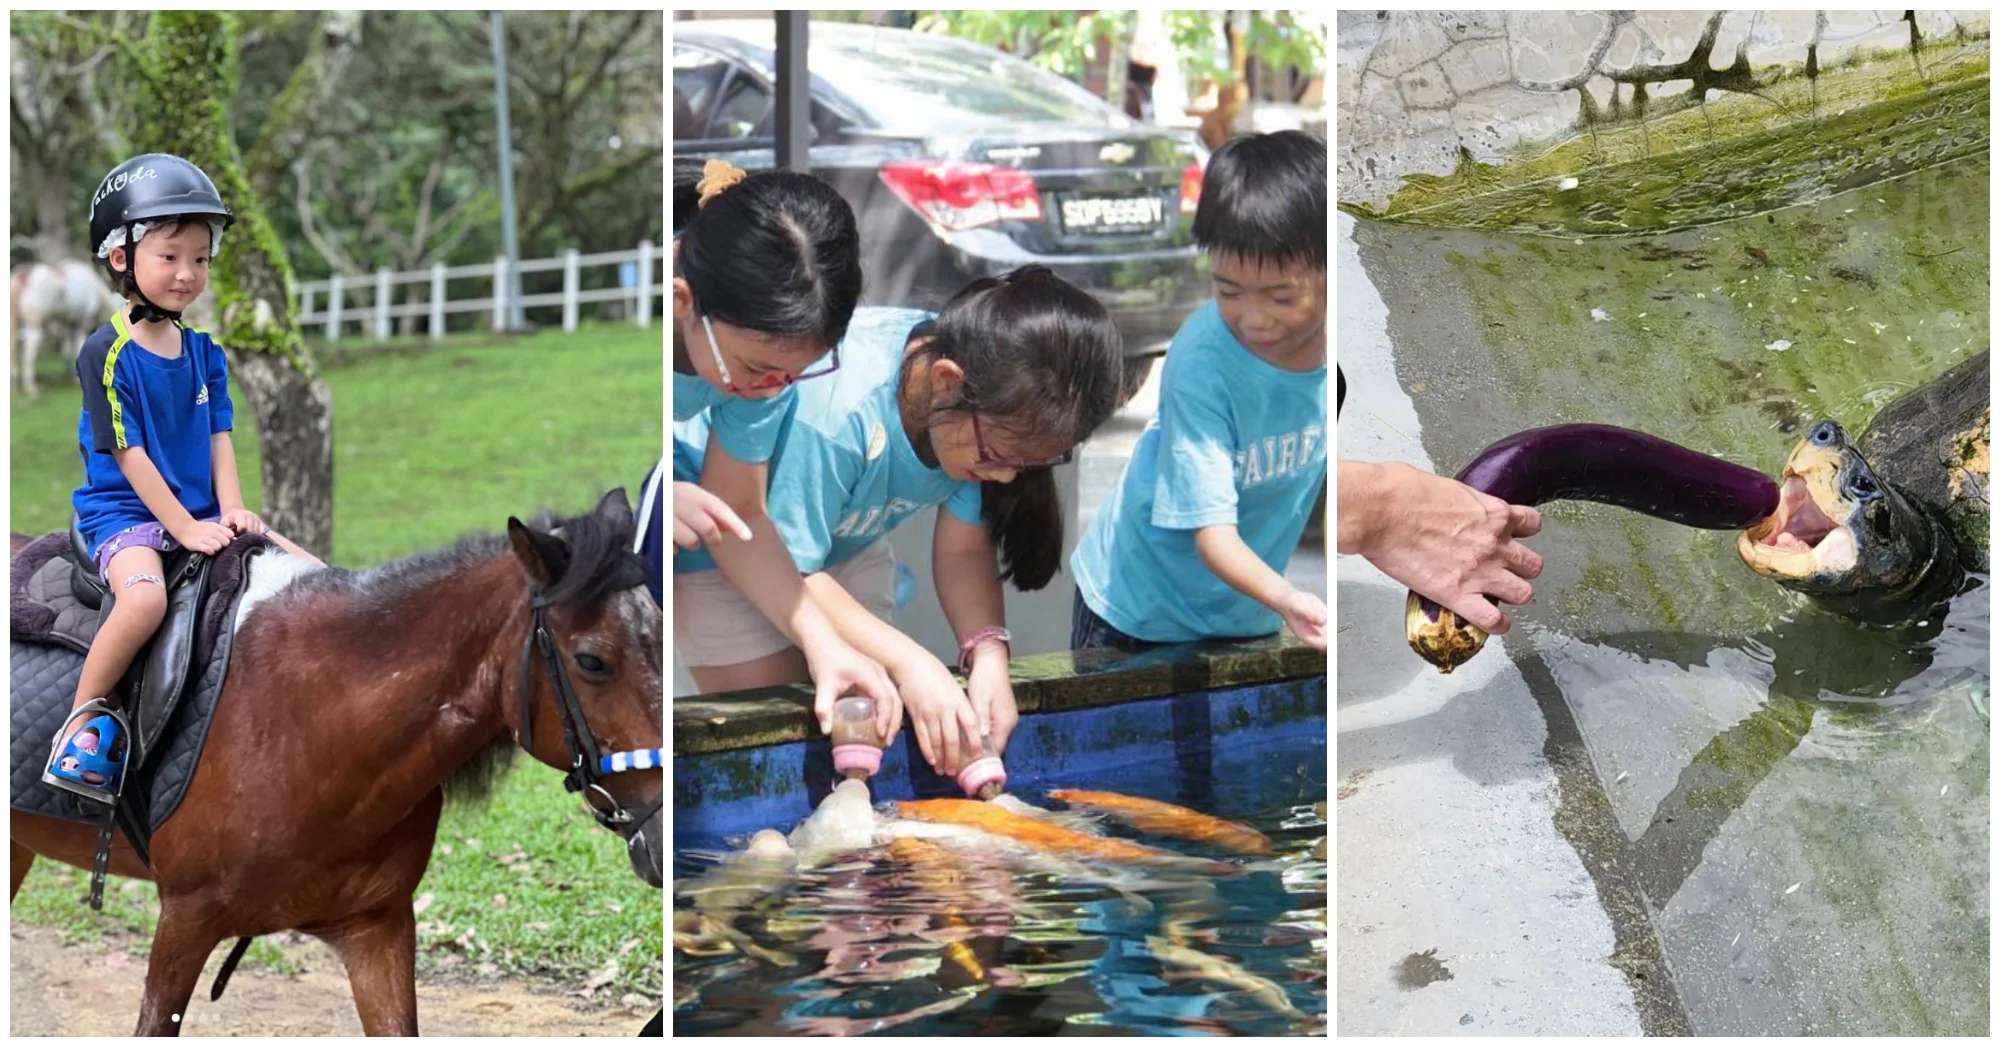 10 Kid-Friendly Animal Farms In Singapore Where You Can Catch Fish, Feed Goats And Ride Horses